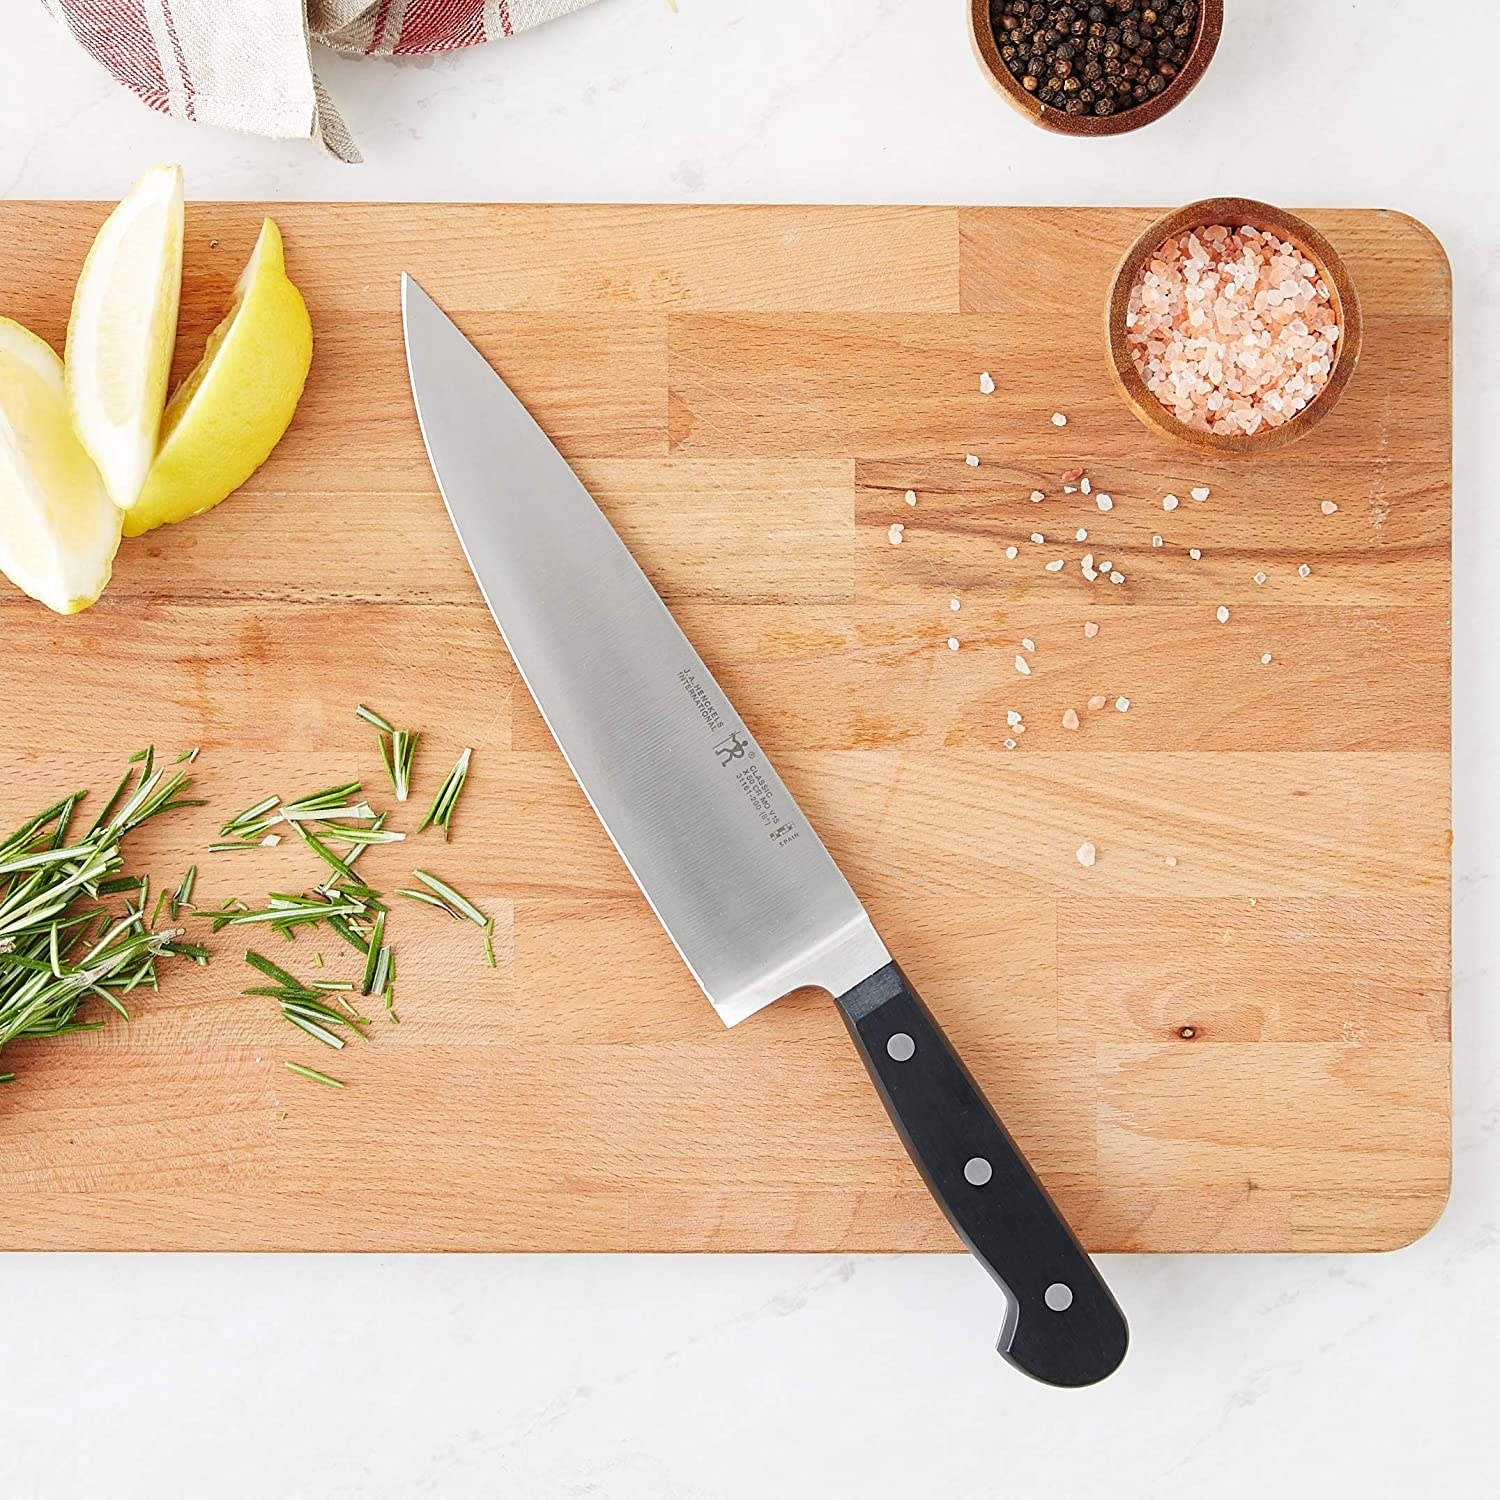 The knife on a cutting board next to lemon slices and rosemary